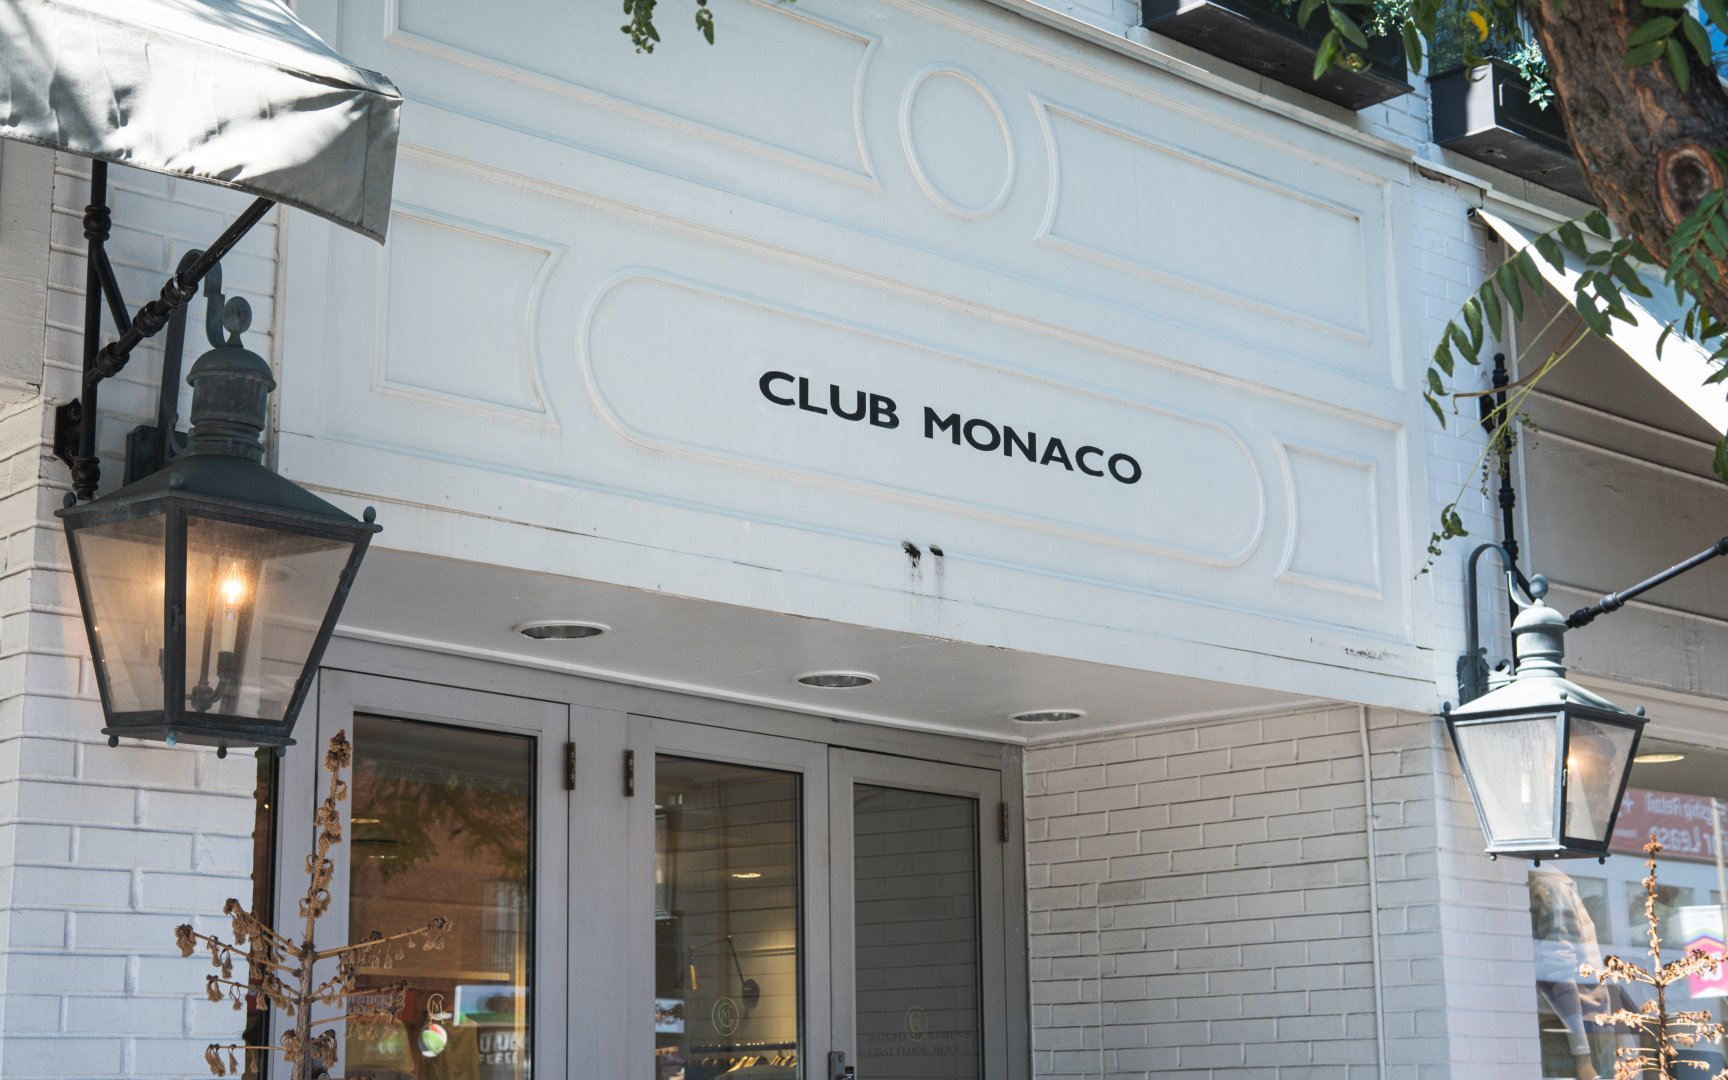 Club Monaco (c) Photo by SHANE Maps exclusively for SHANE Maps